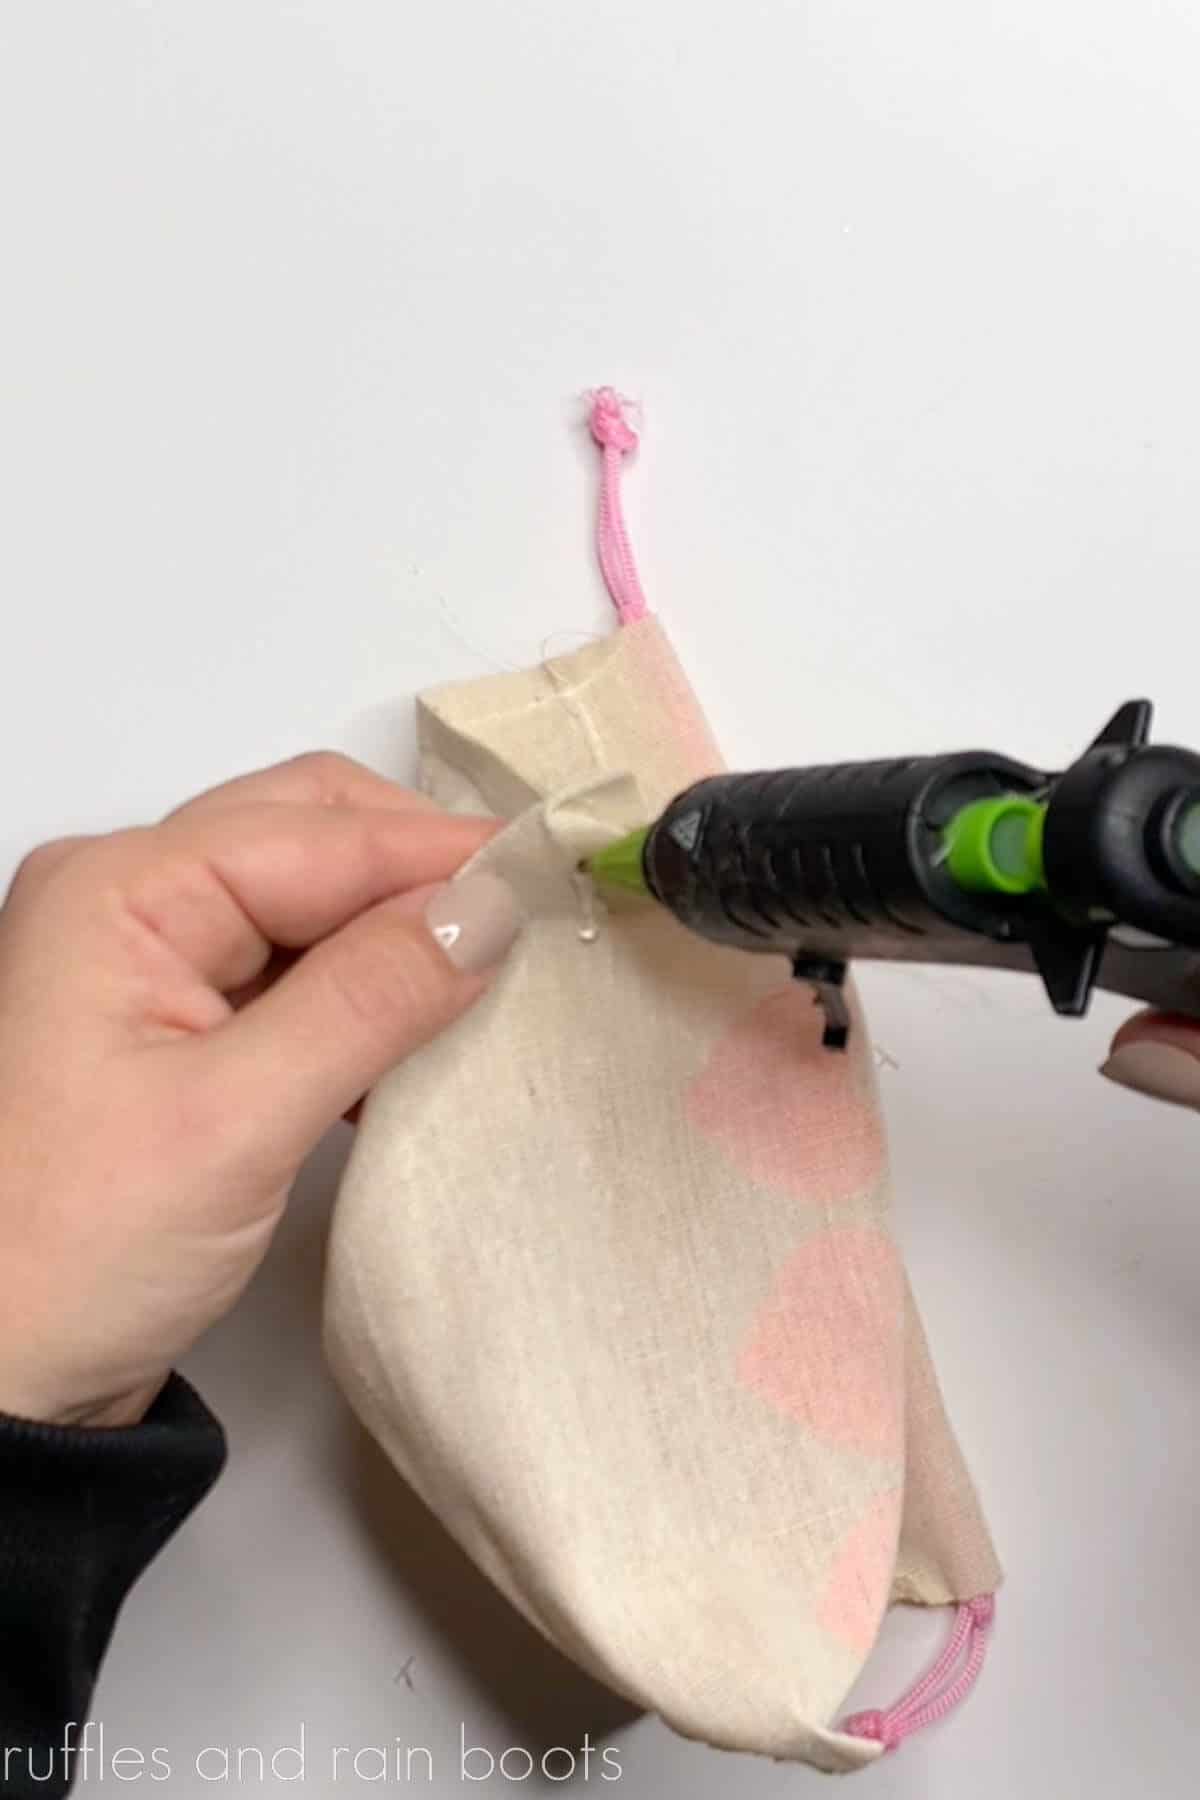 Crafter gluing the corners of a treat bag with hot glue.